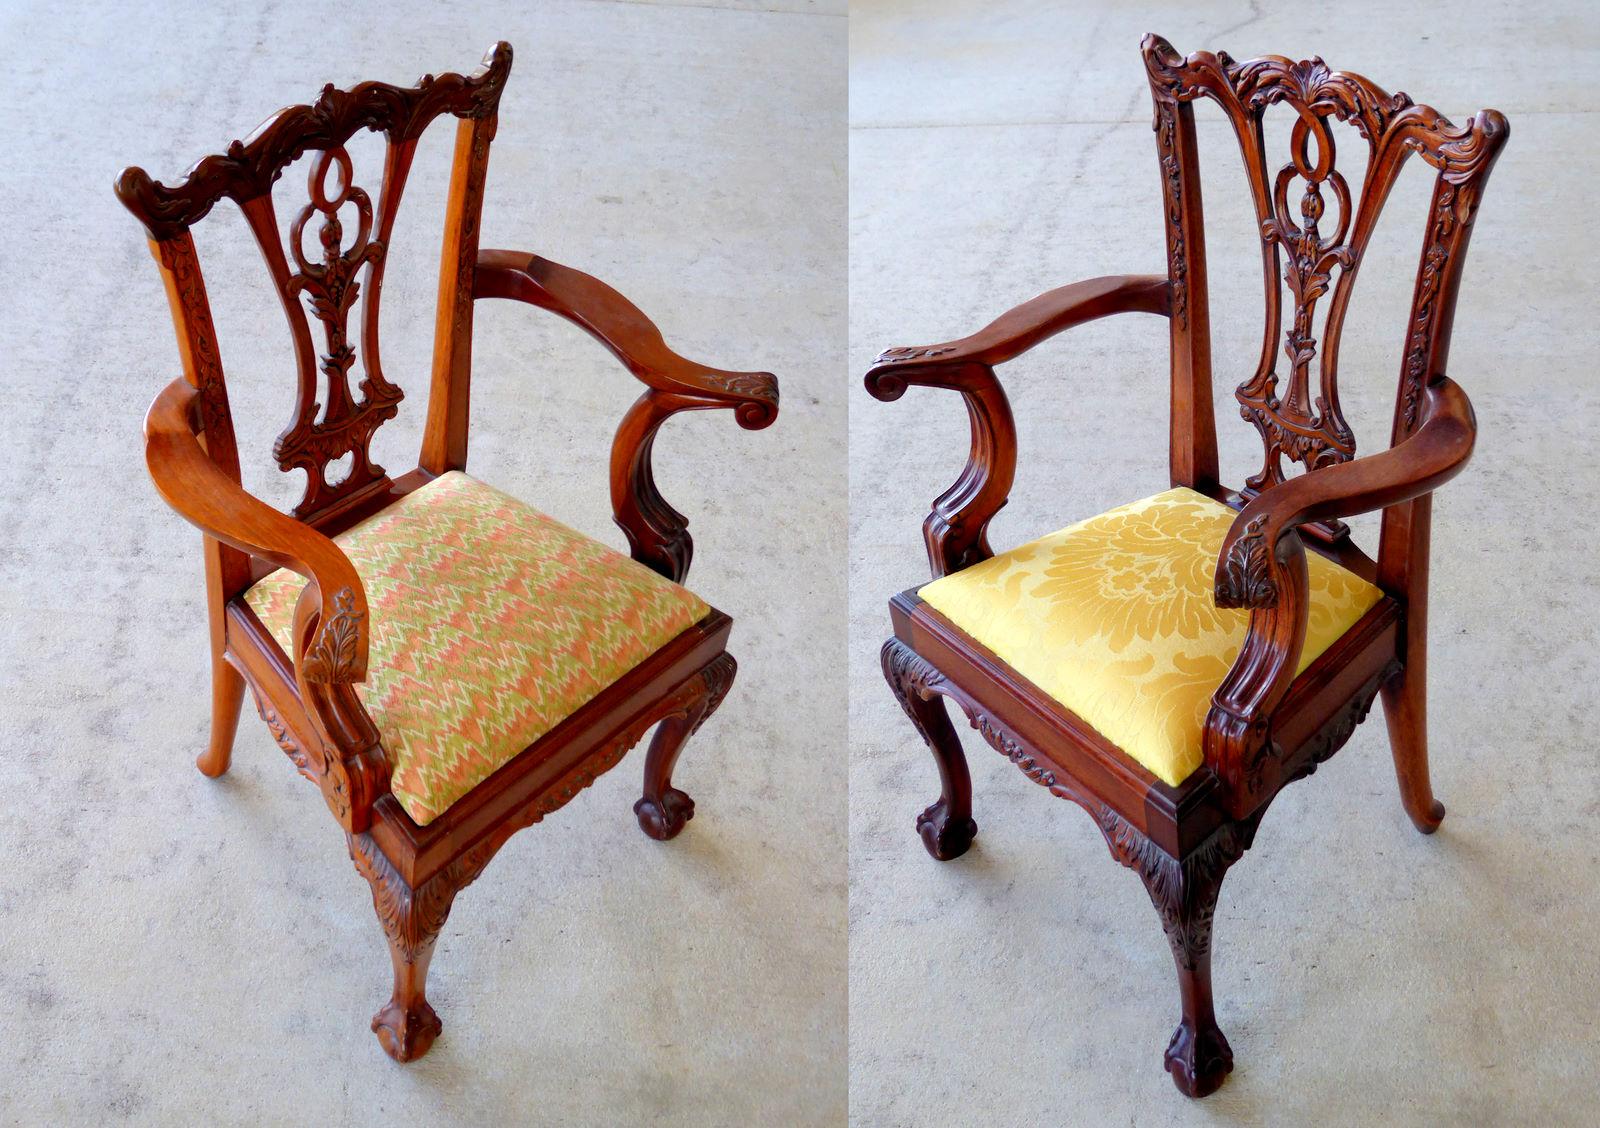 samples of chairs